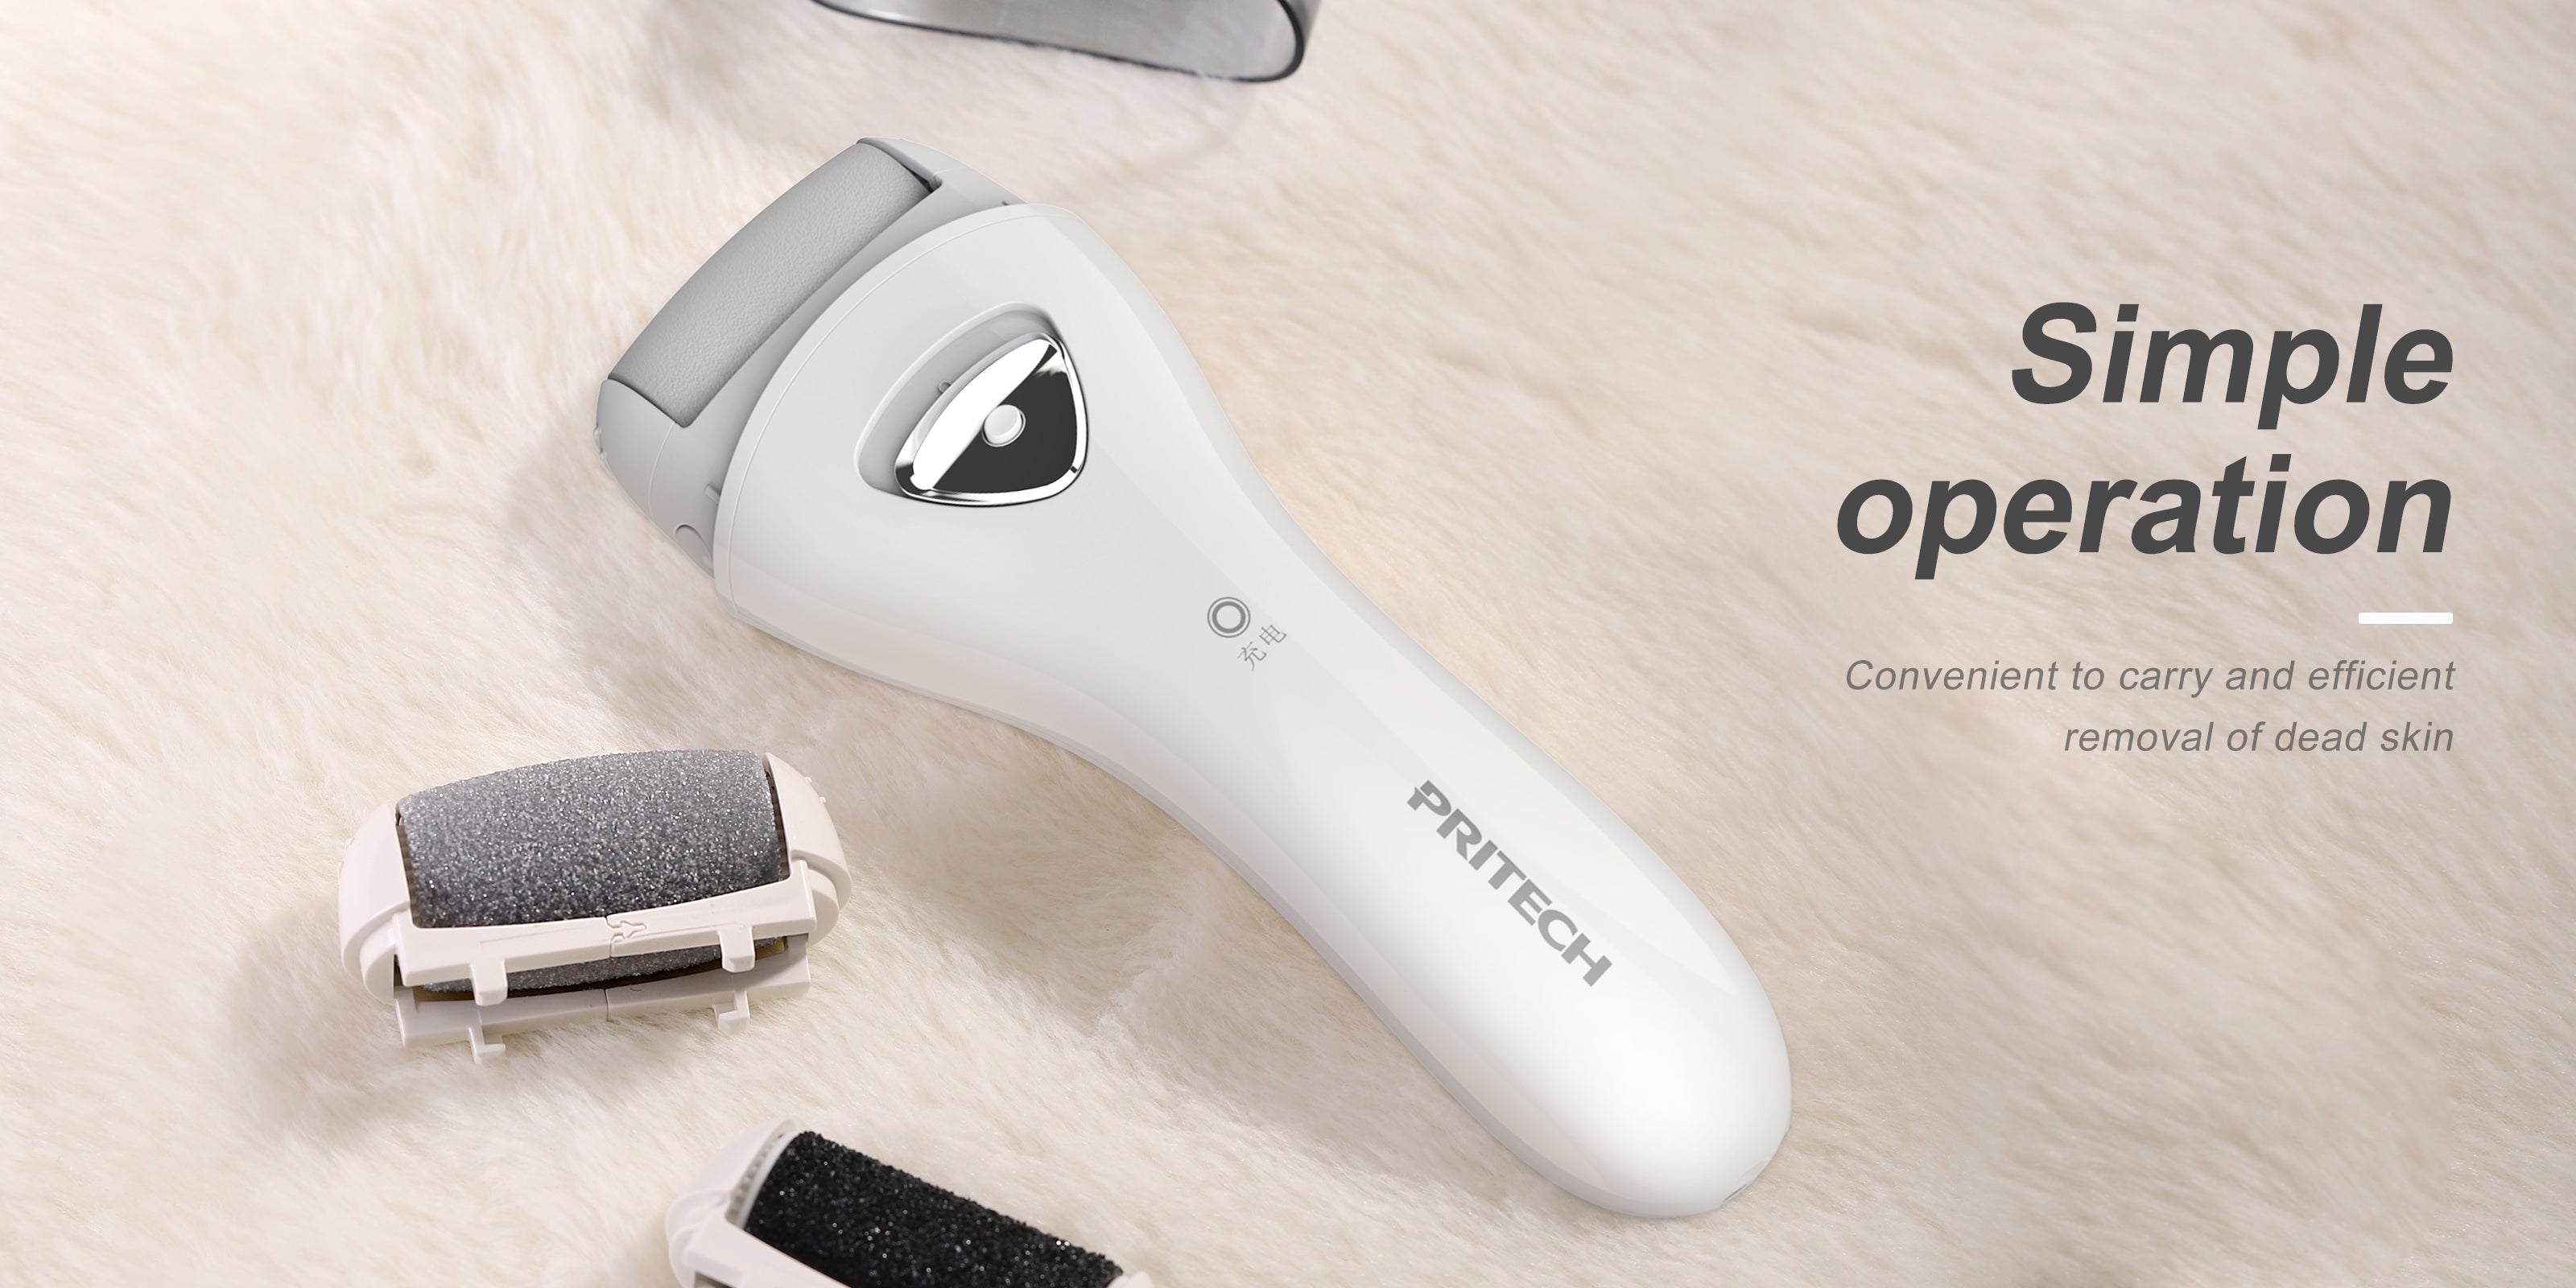 Pritech's $19 Electric Callus Remover 'Works Wonders' on Dry Feet